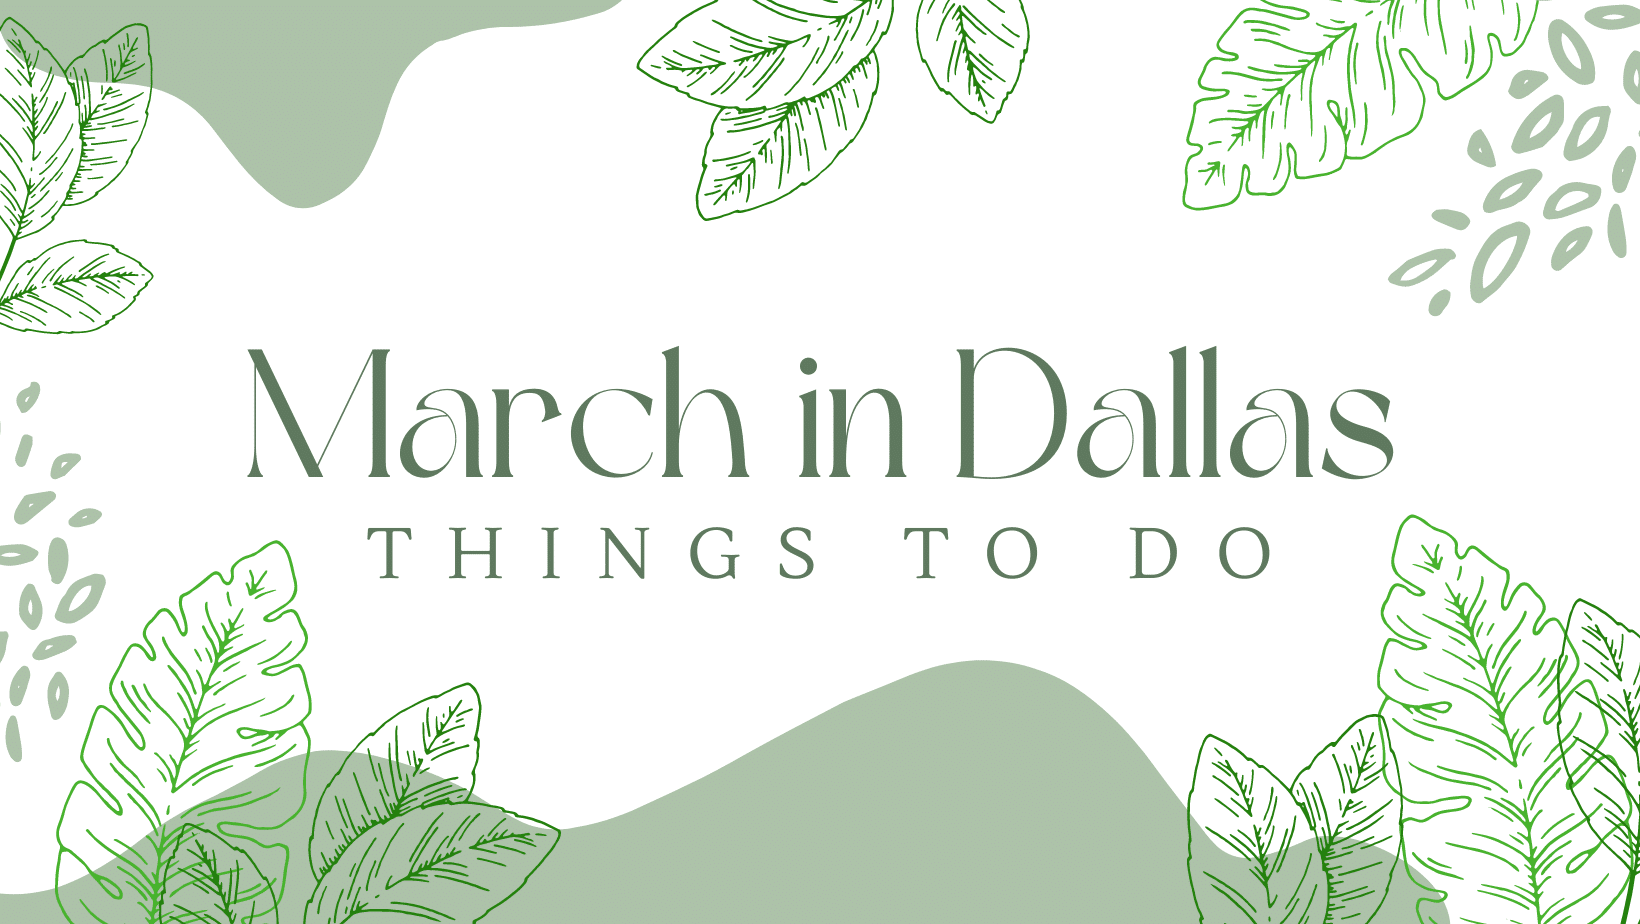 March in dallas things to do.